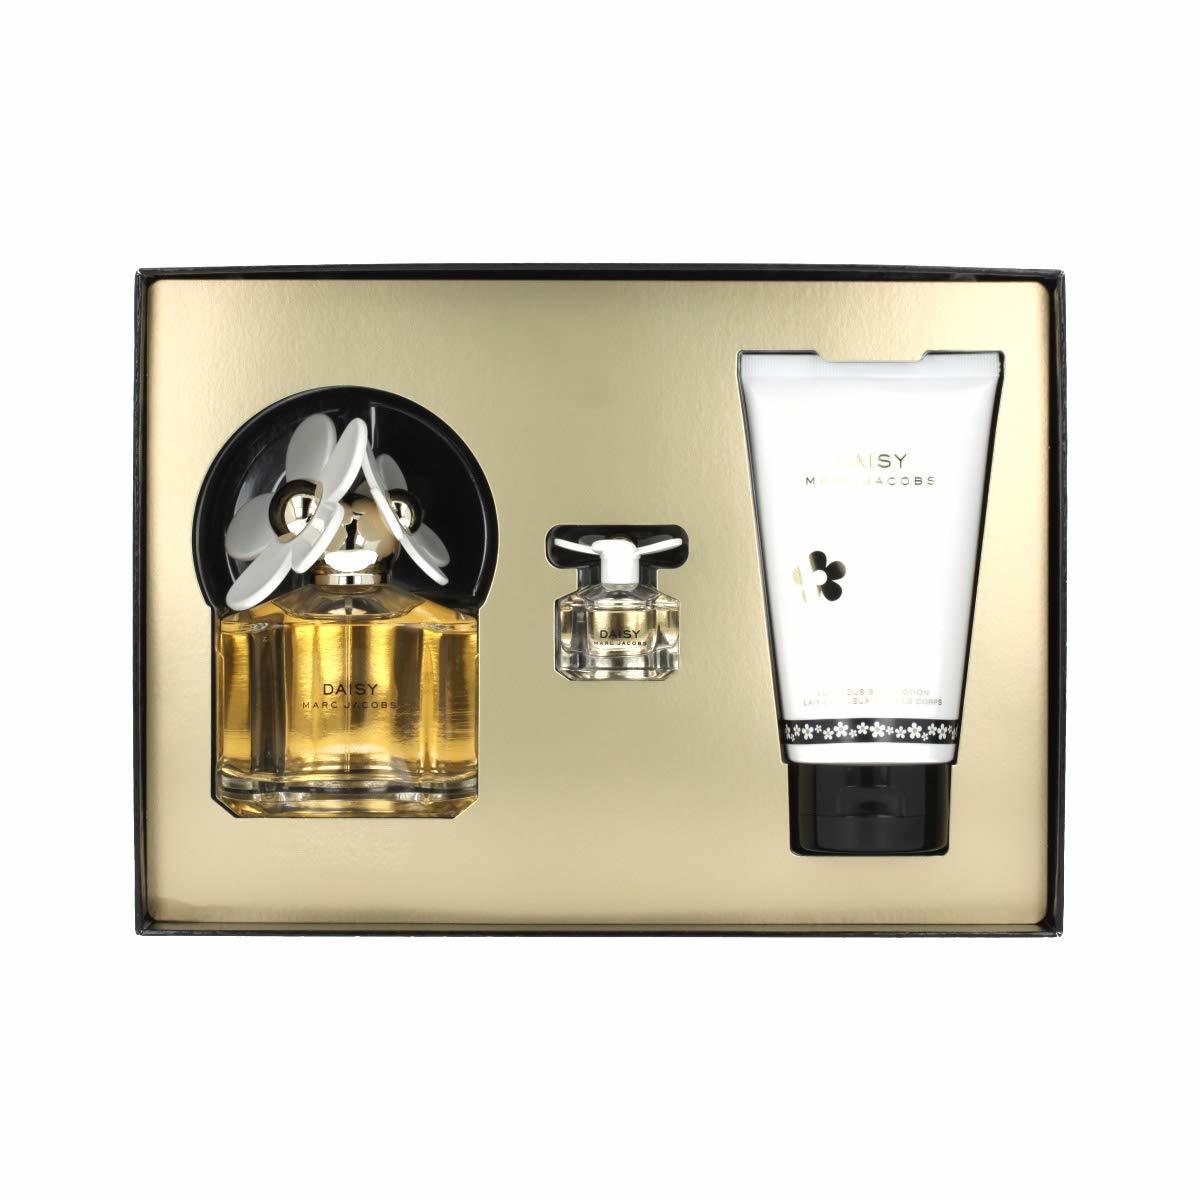 Daisy by Marc Jacobs 3 Piece Gift Set - $148.45